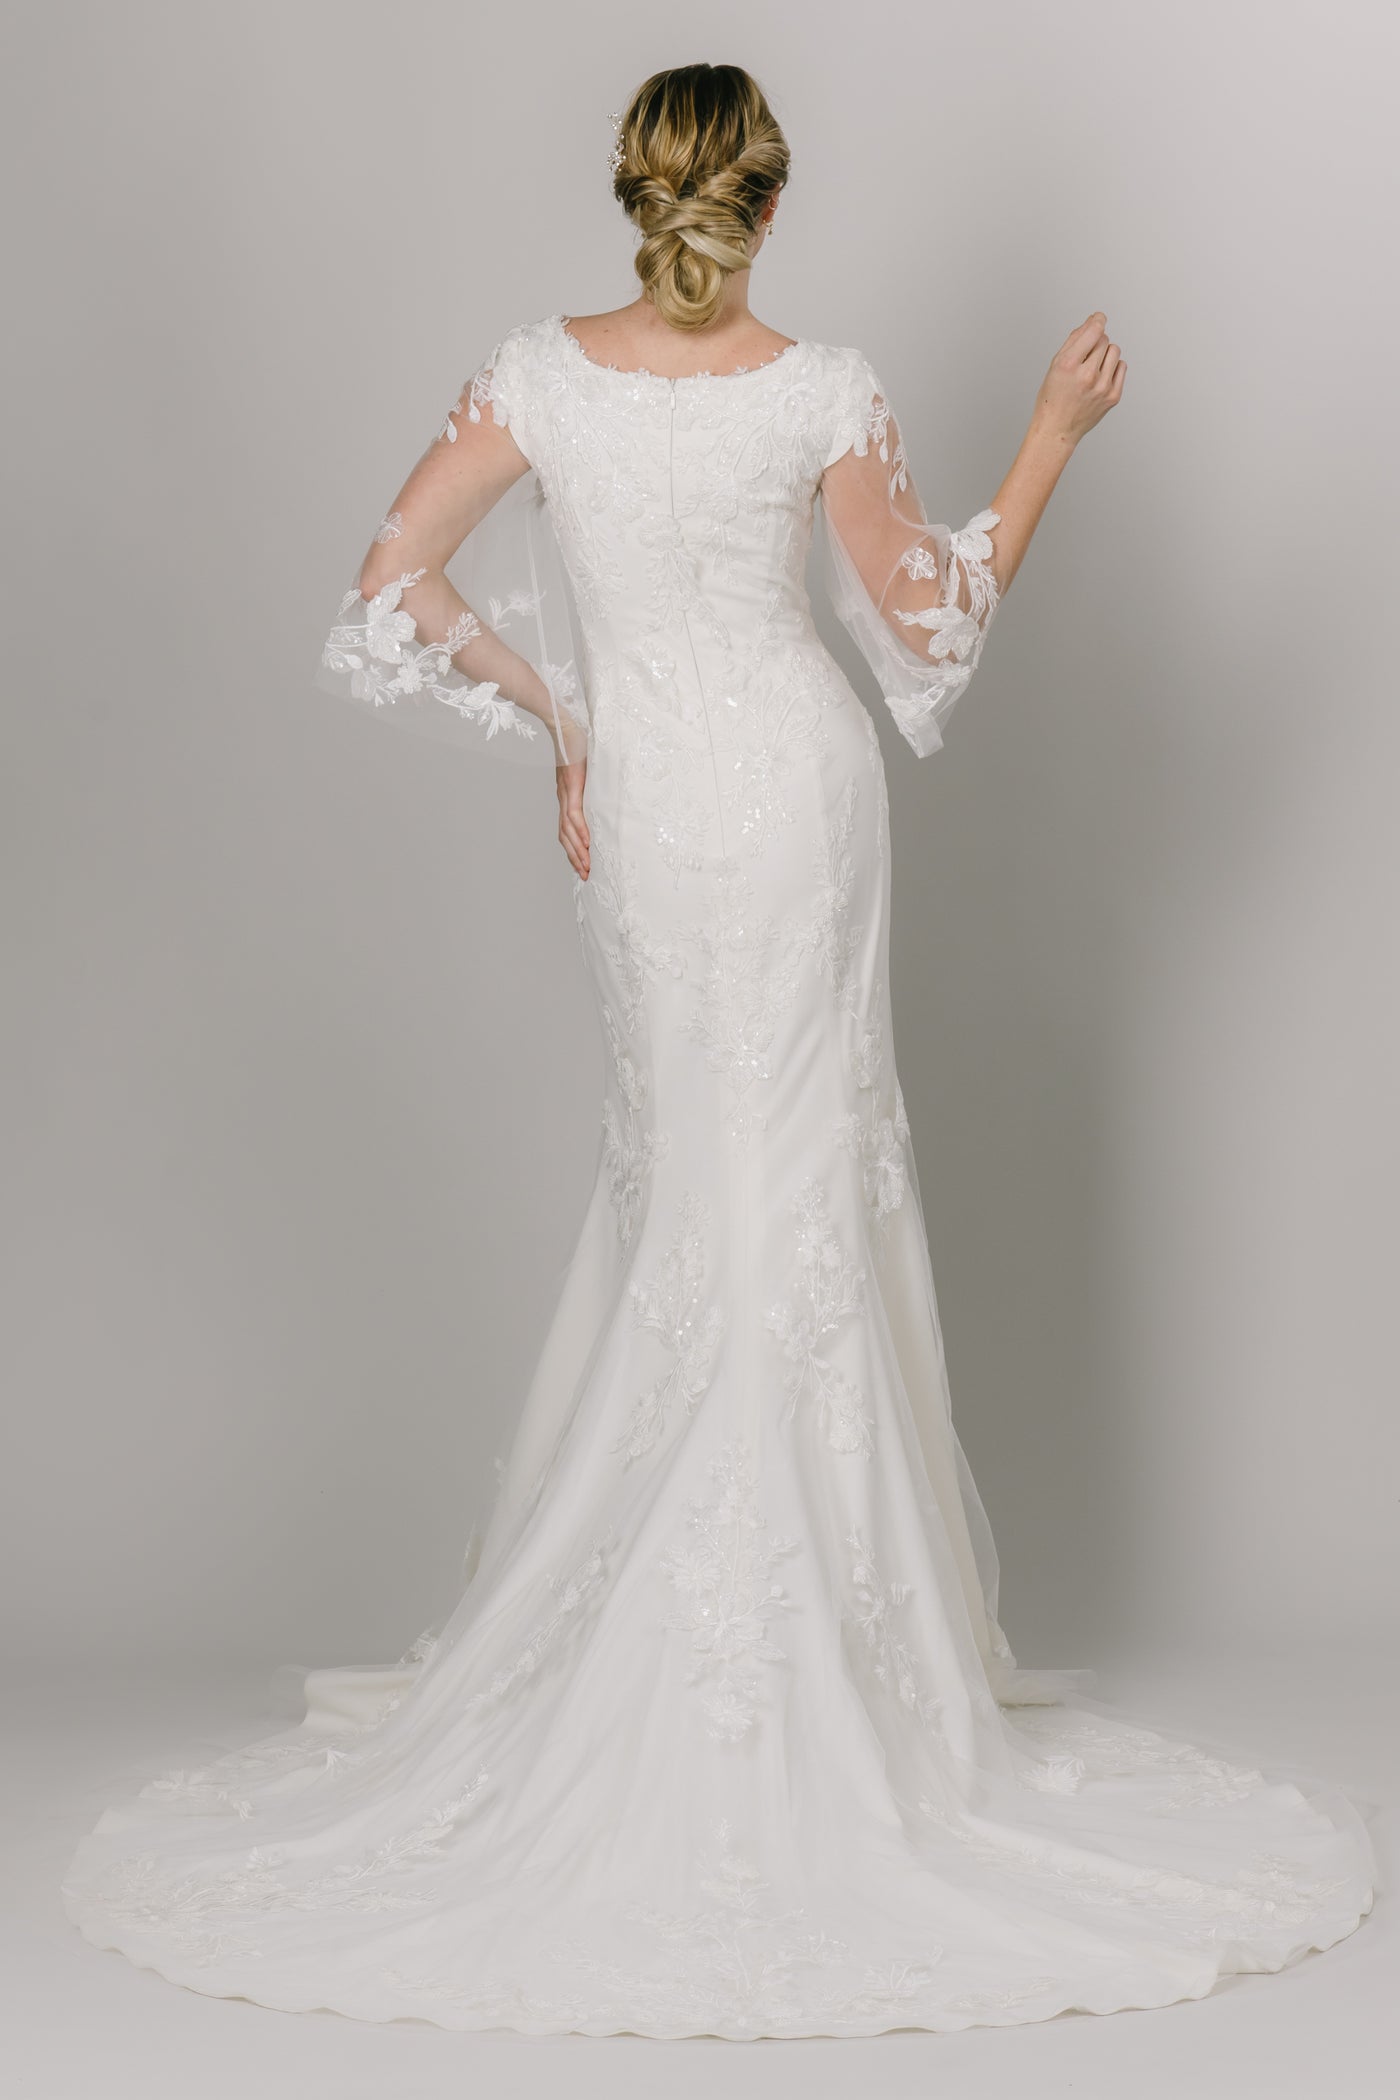 This Modest Wedding Dress features long flutter sleeves, and a fitted style. - Modest Wedding Dresses - Modest Clothing - Modest Dresses -Moments Made Bridal